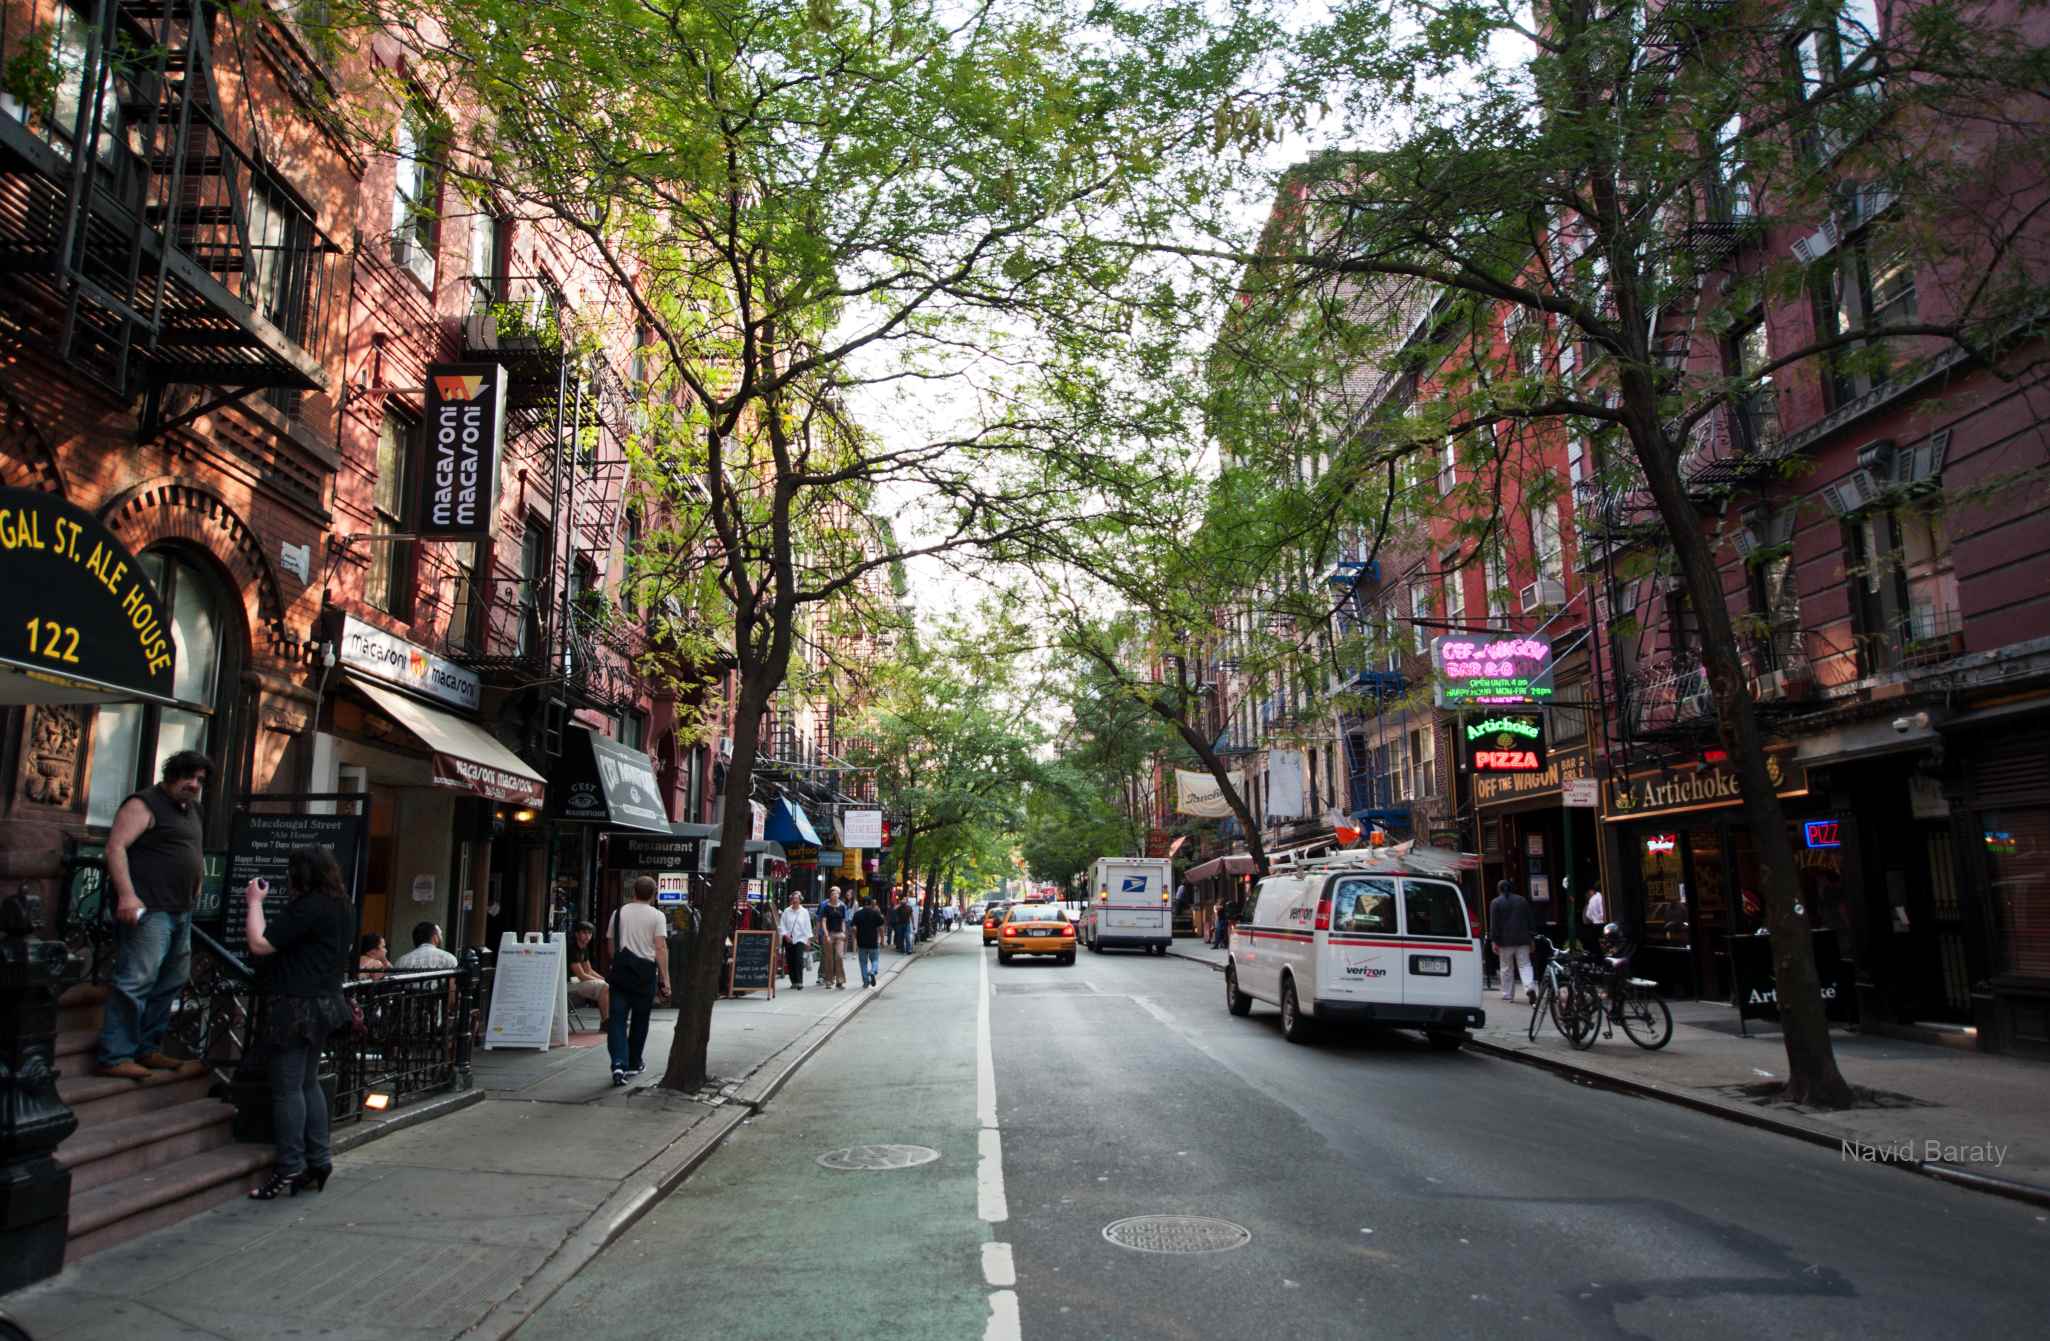 overrated main attractions in nyc greenwich village